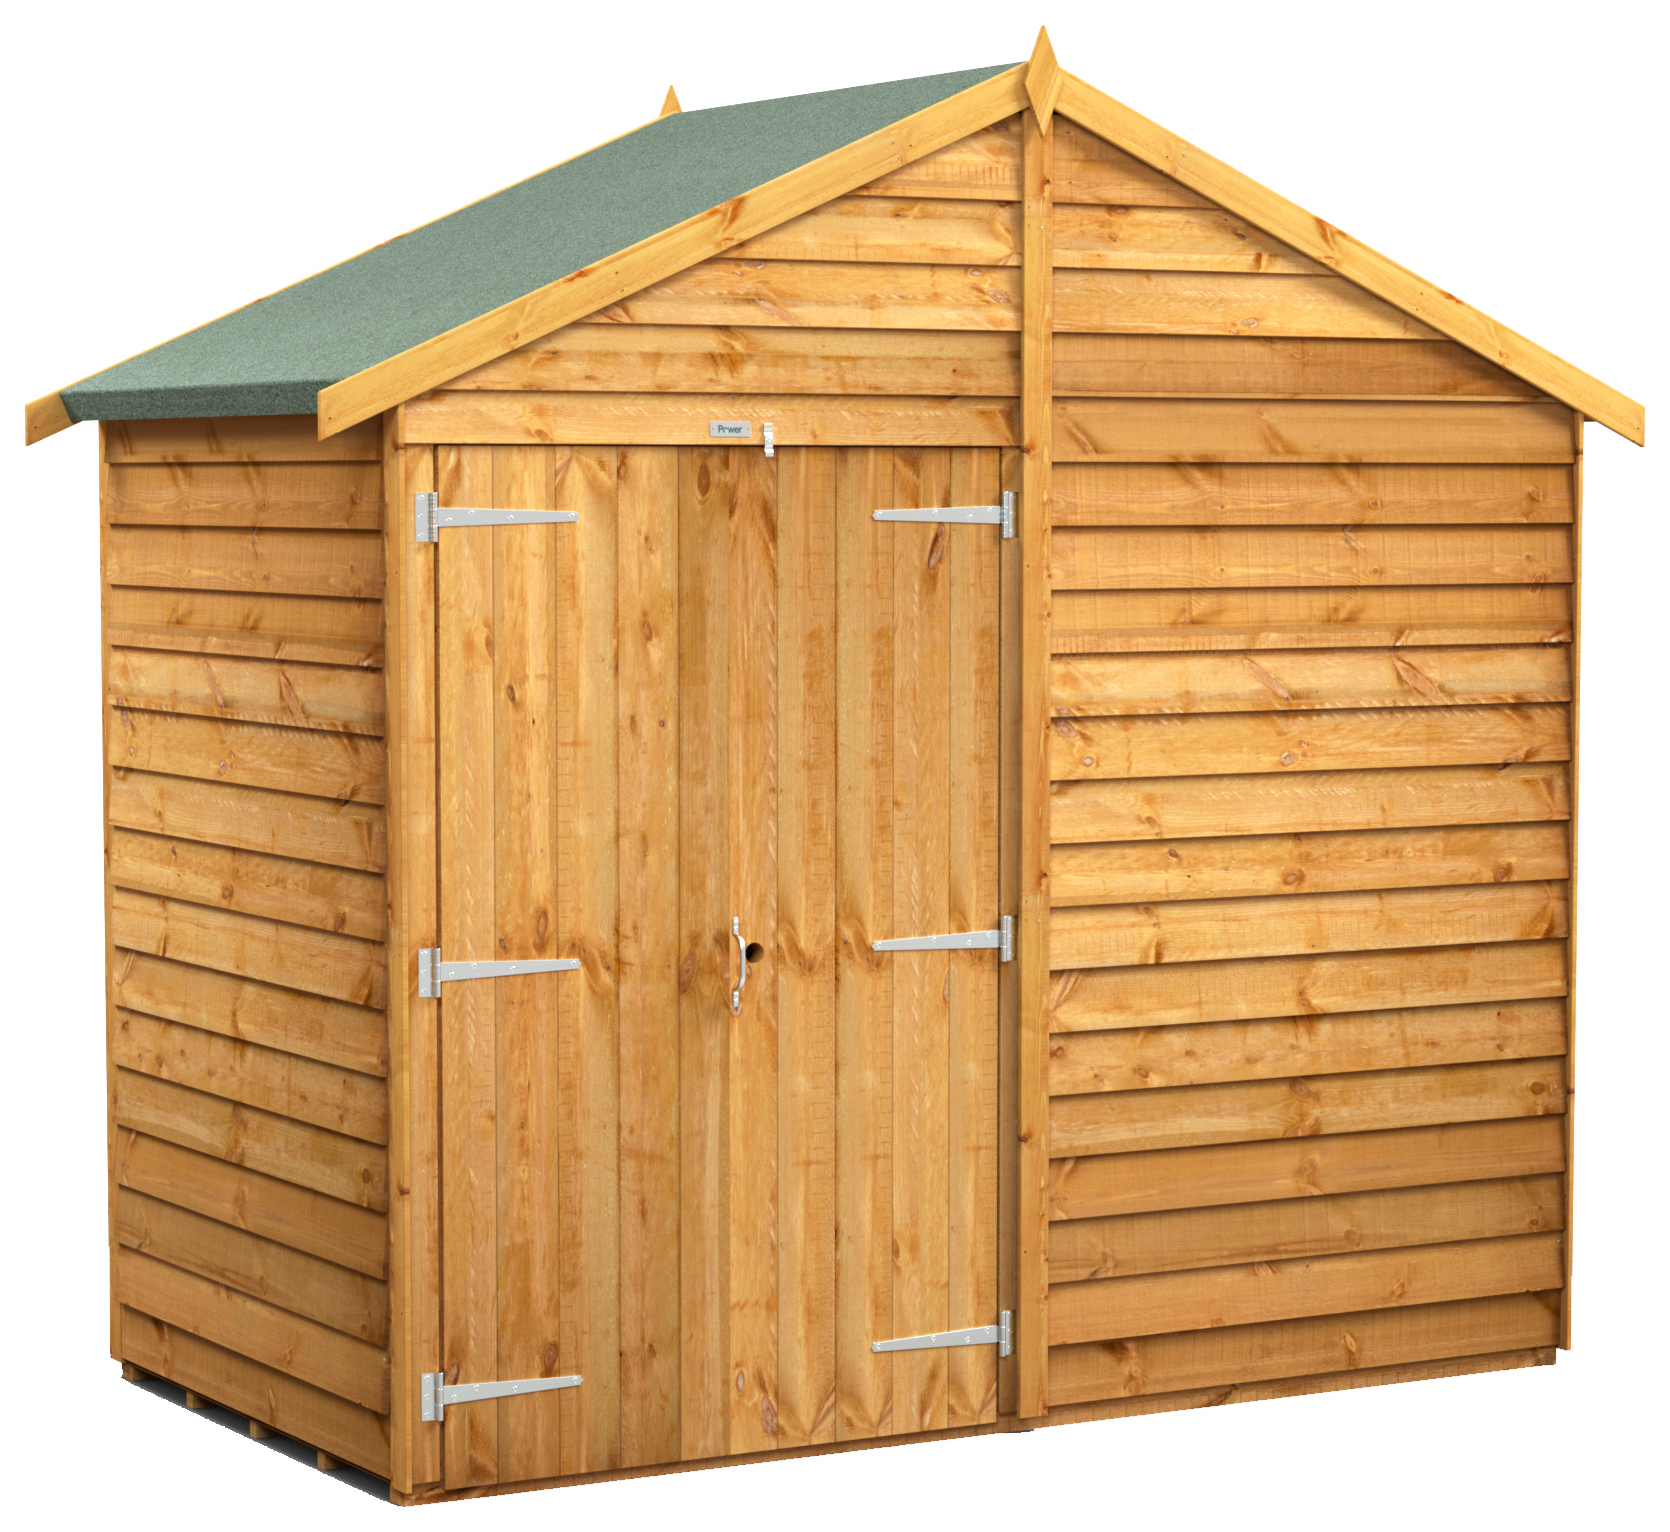 Power Sheds Double Door Apex Overlap Dip Treated Windowless Shed - 4 x 8ft